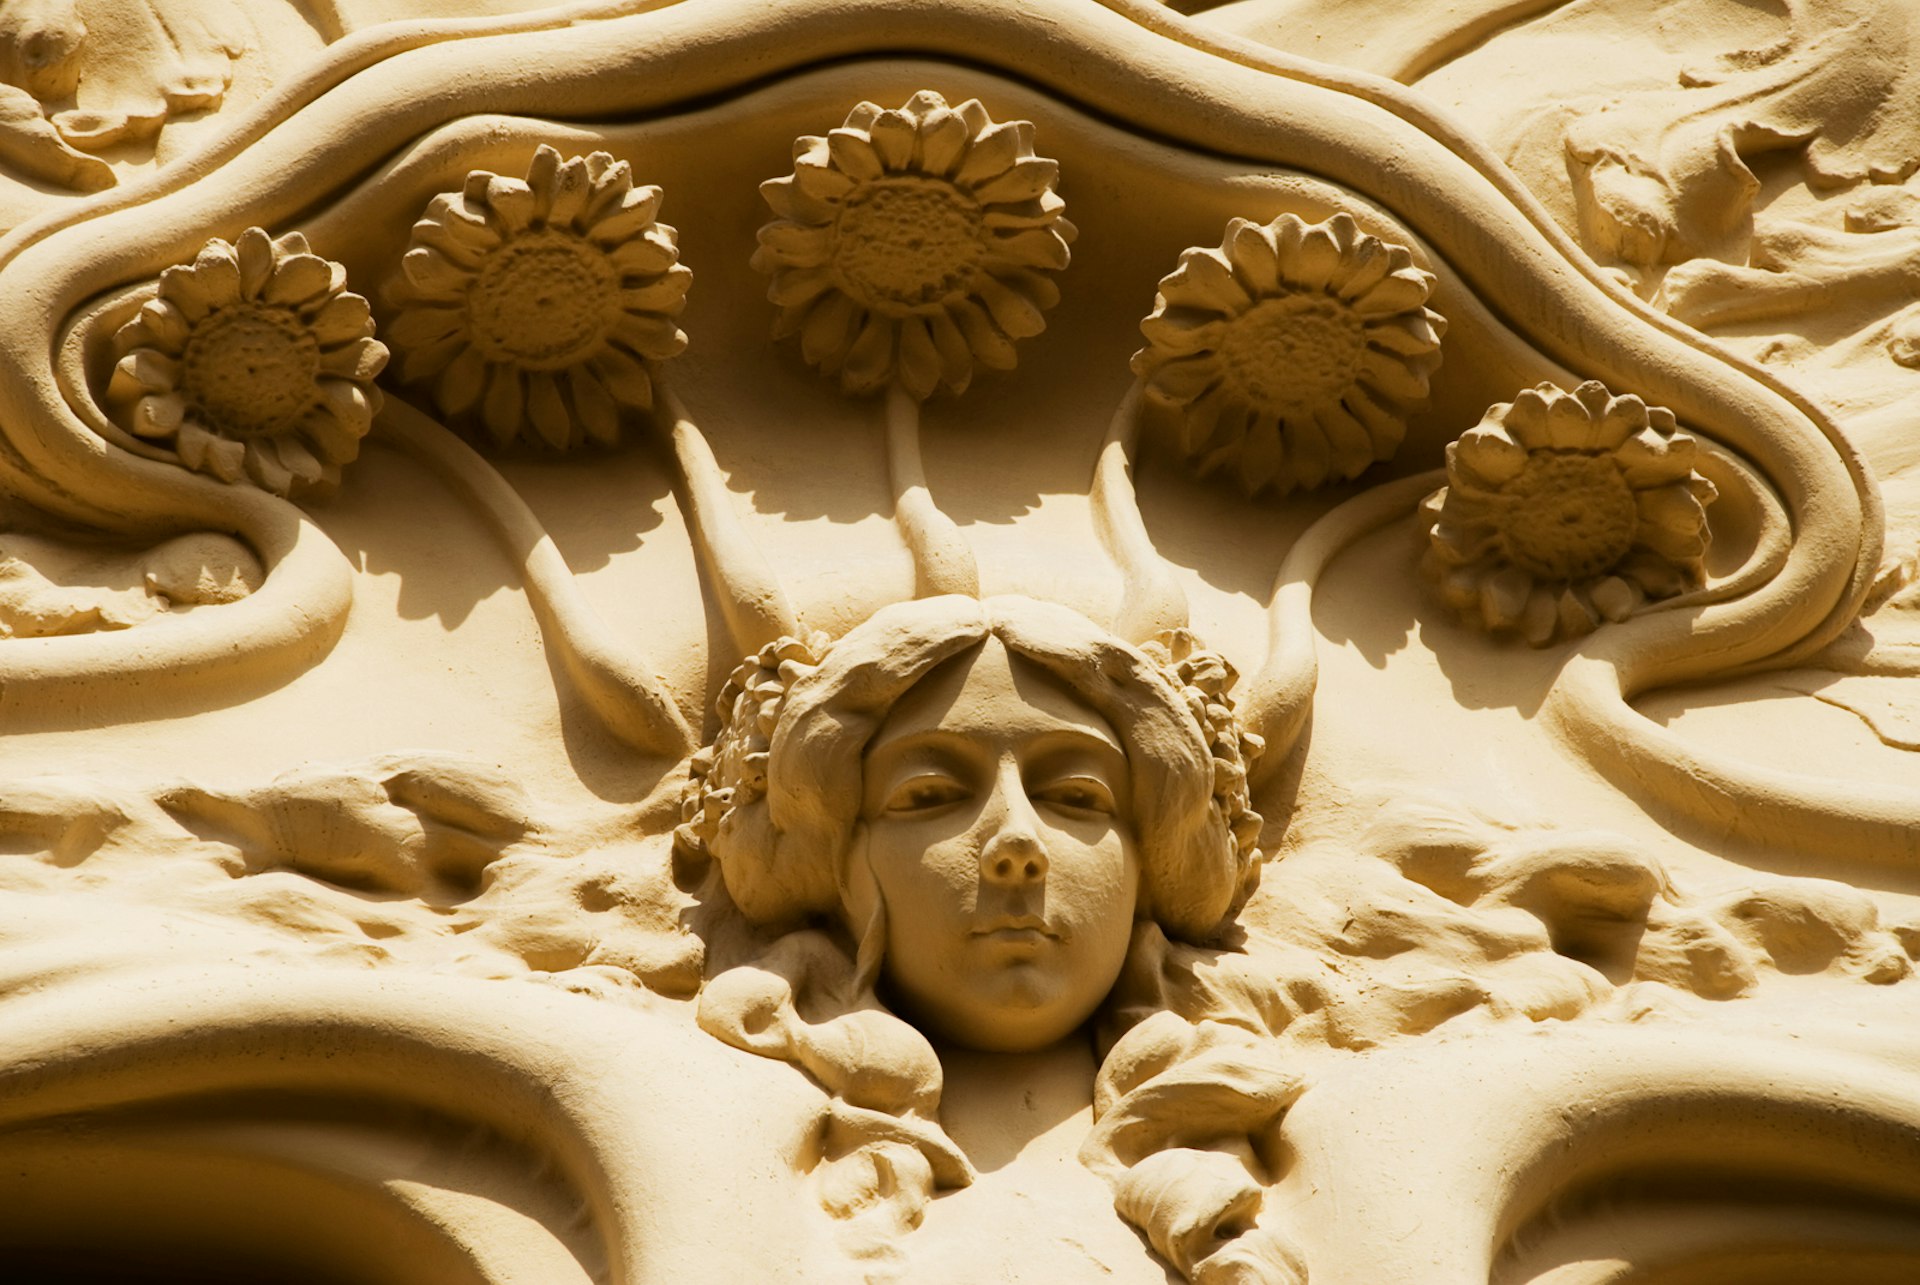 Detail of the Sociedad General de Autores y Editores showing a human face and other intricate designs